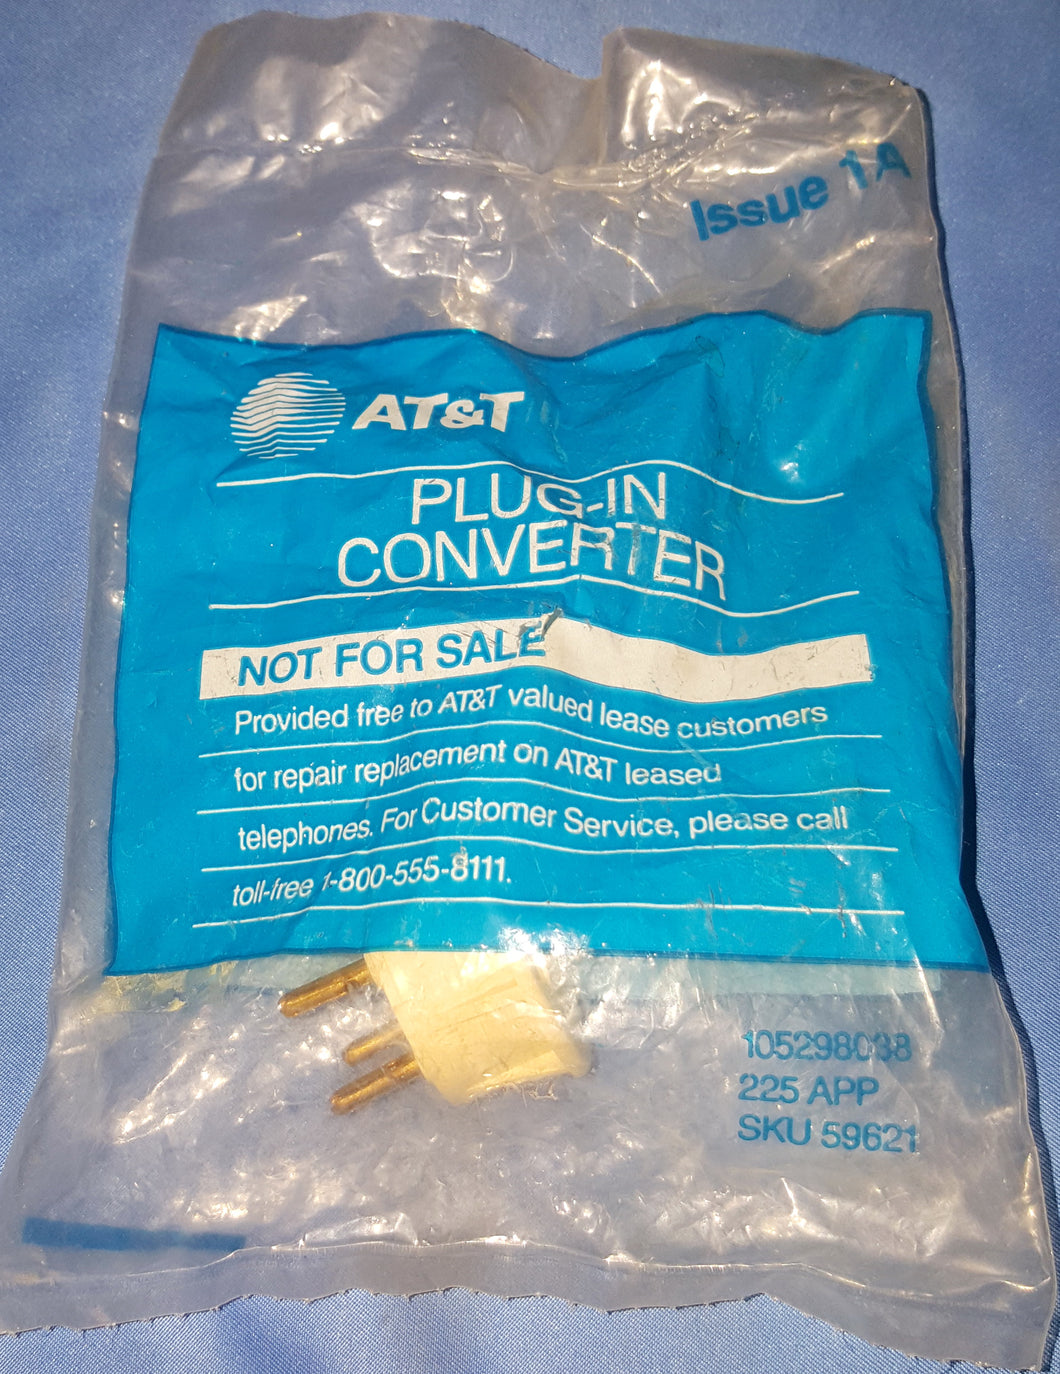 NEW AT&T 4-Prong to RJ11 Plug-In Converter